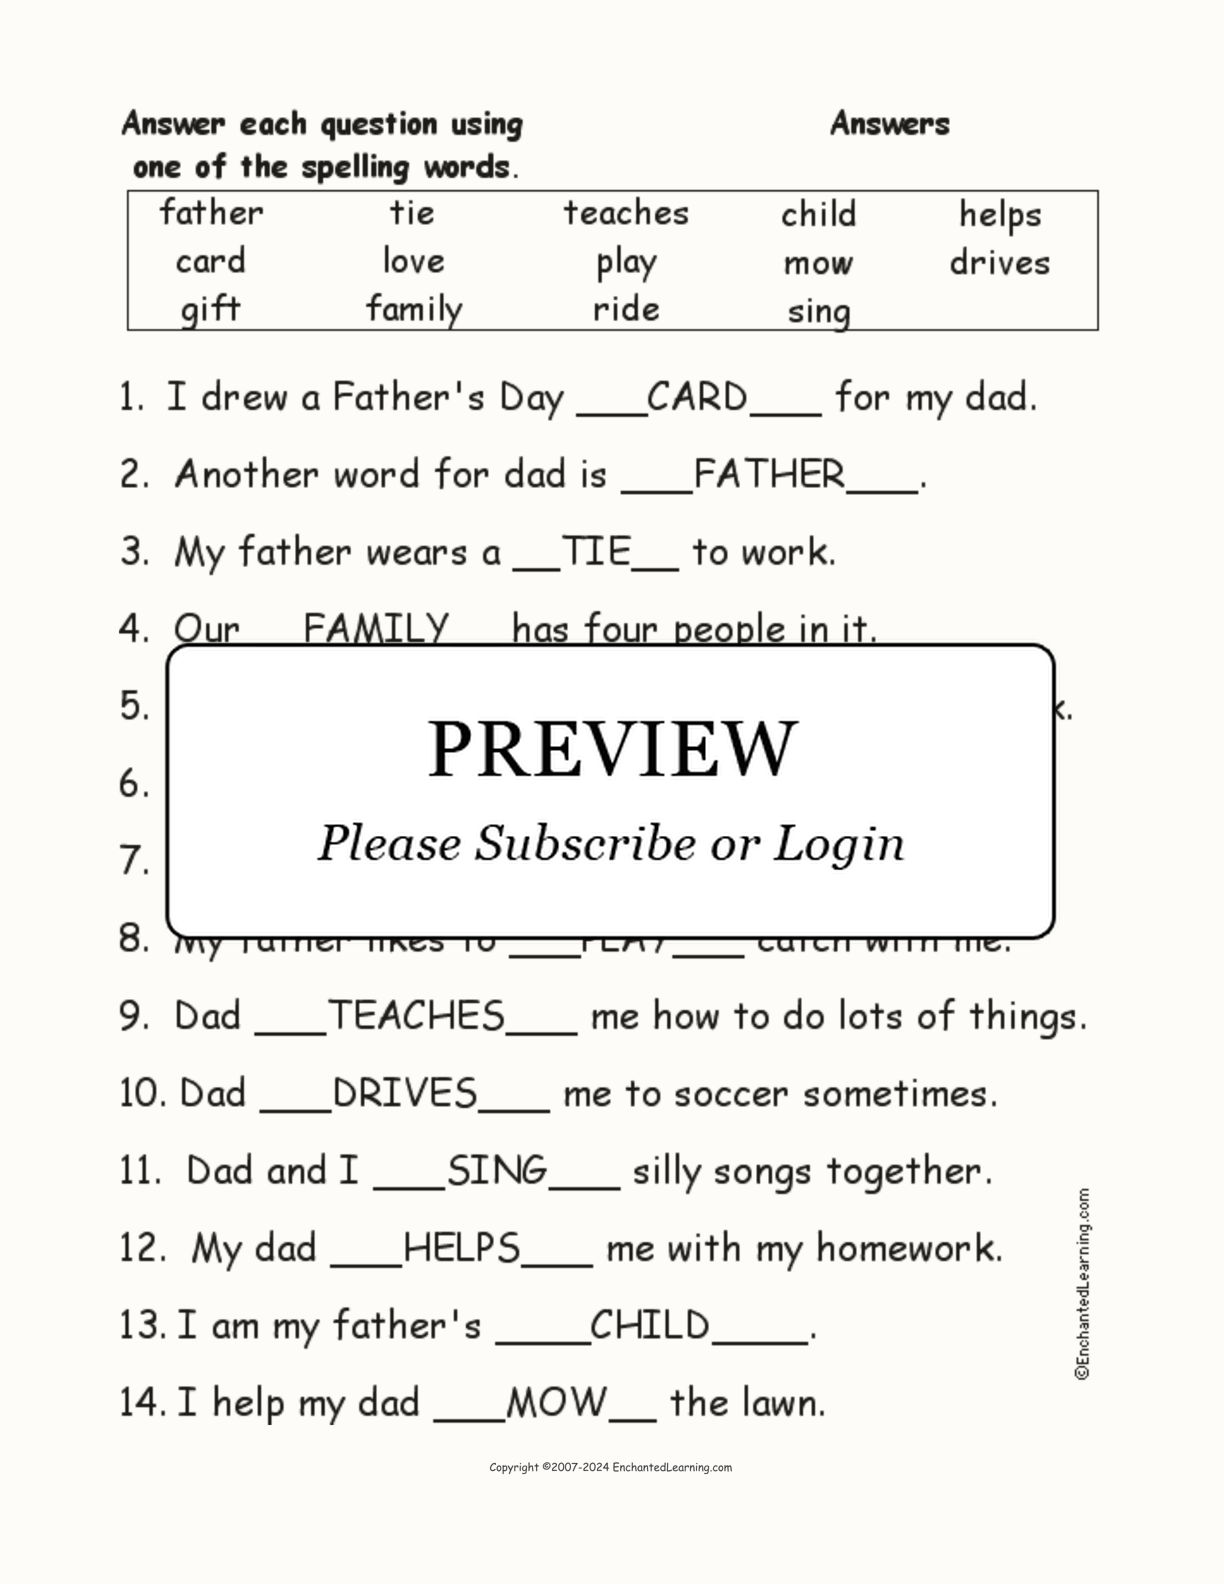 Father's Day Spelling Word Questions interactive worksheet page 2